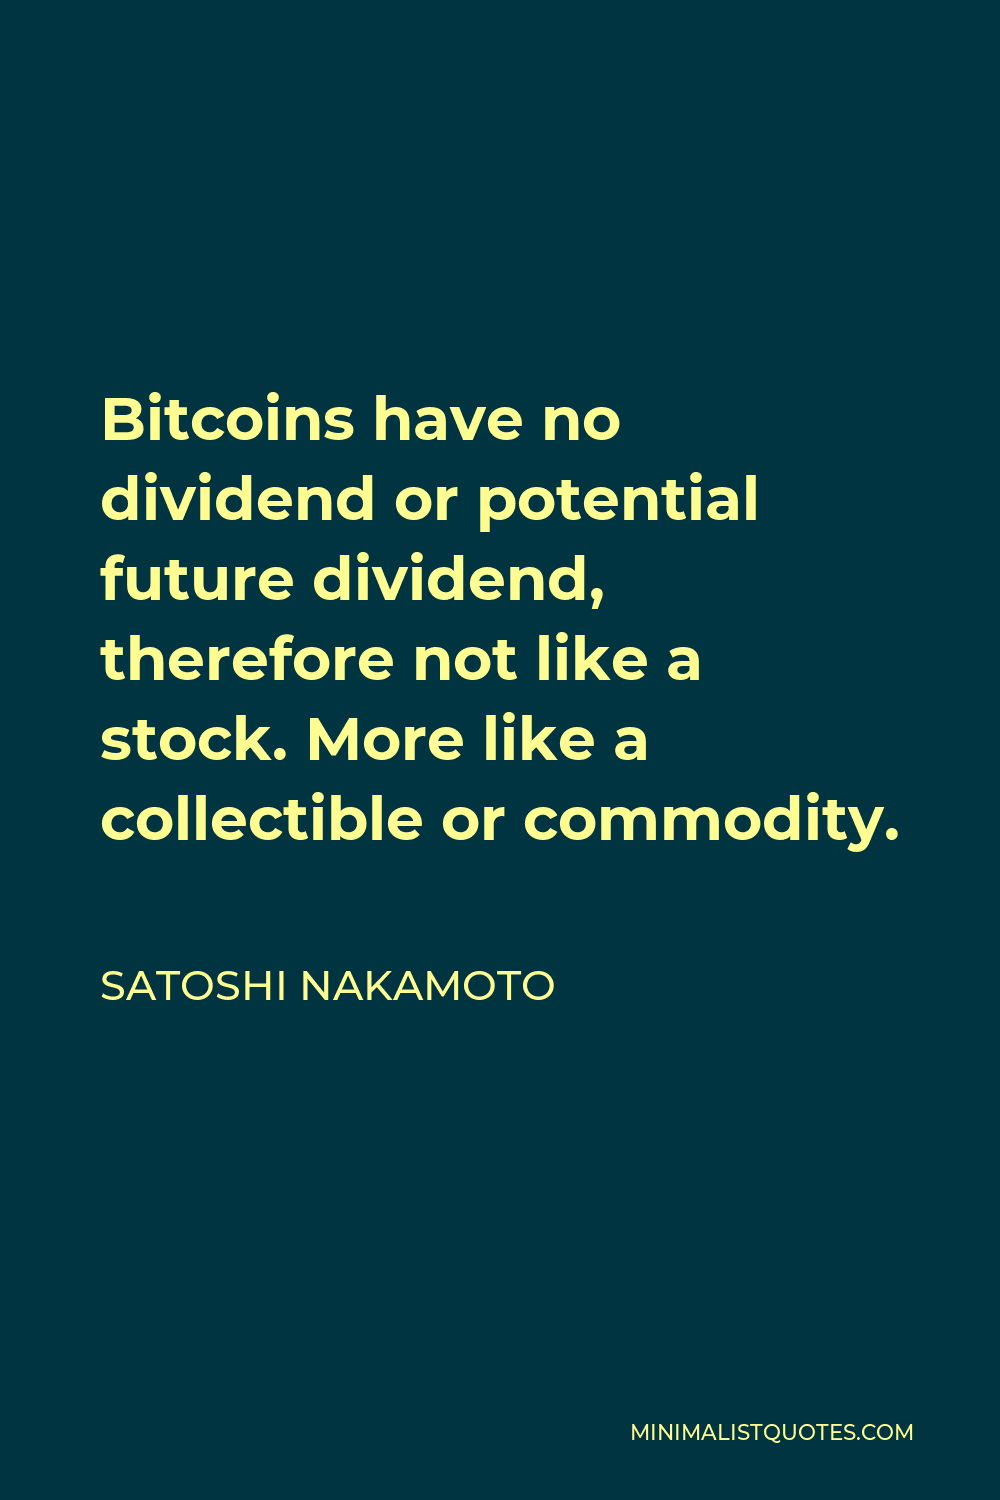 Satoshi Nakamoto Quote - Bitcoins have no dividend or potential future dividend, therefore not like a stock. More like a collectible or commodity.